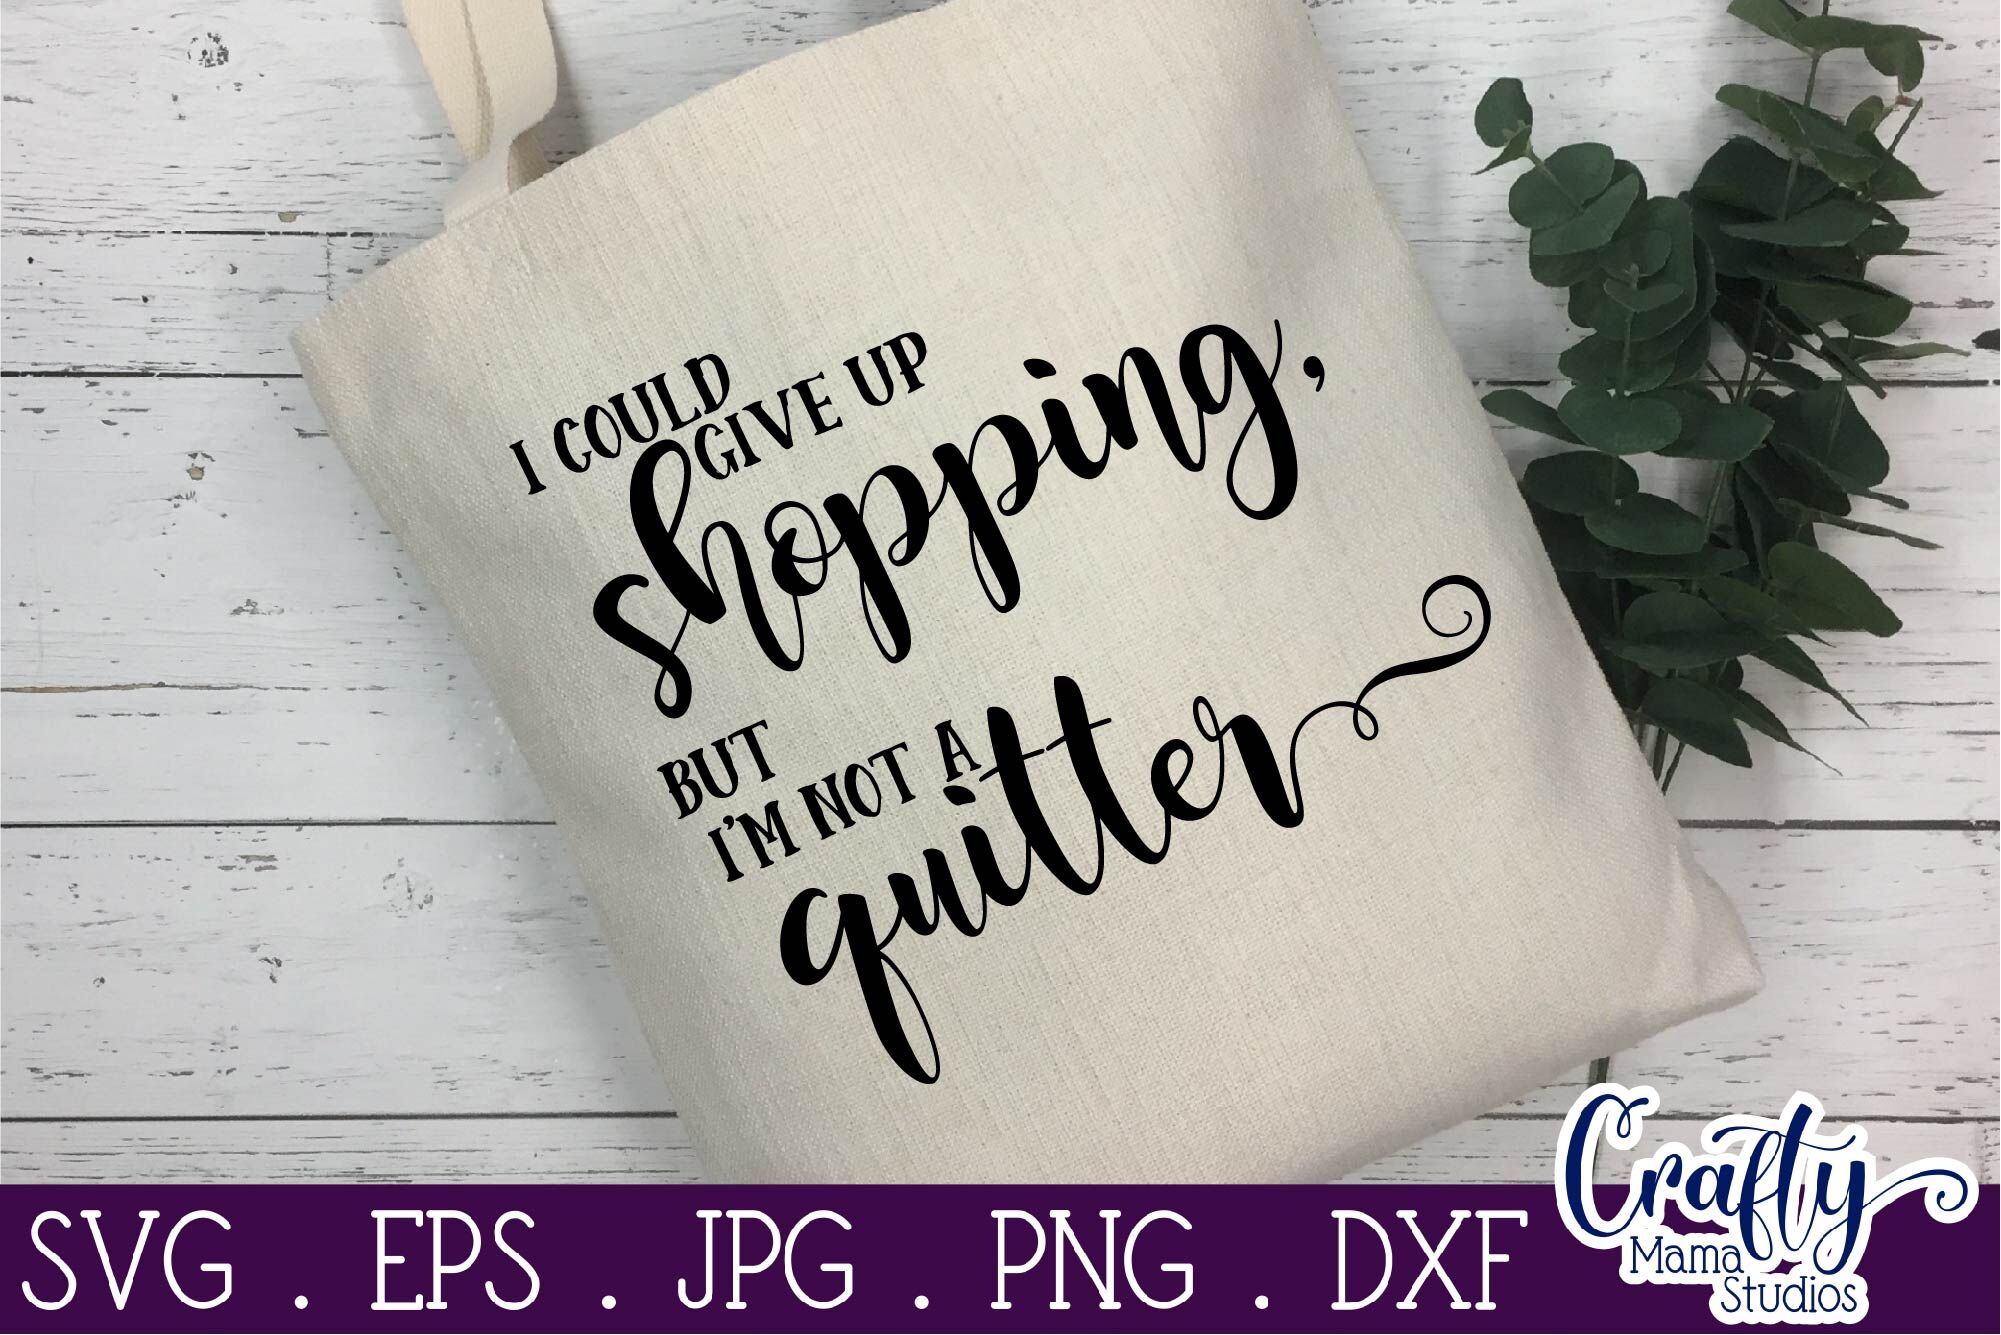 Funny Svg - I Could Give Up Shopping But I'm No Quitter Svg - Shopping By  Crafty Mama Studios | TheHungryJPEG